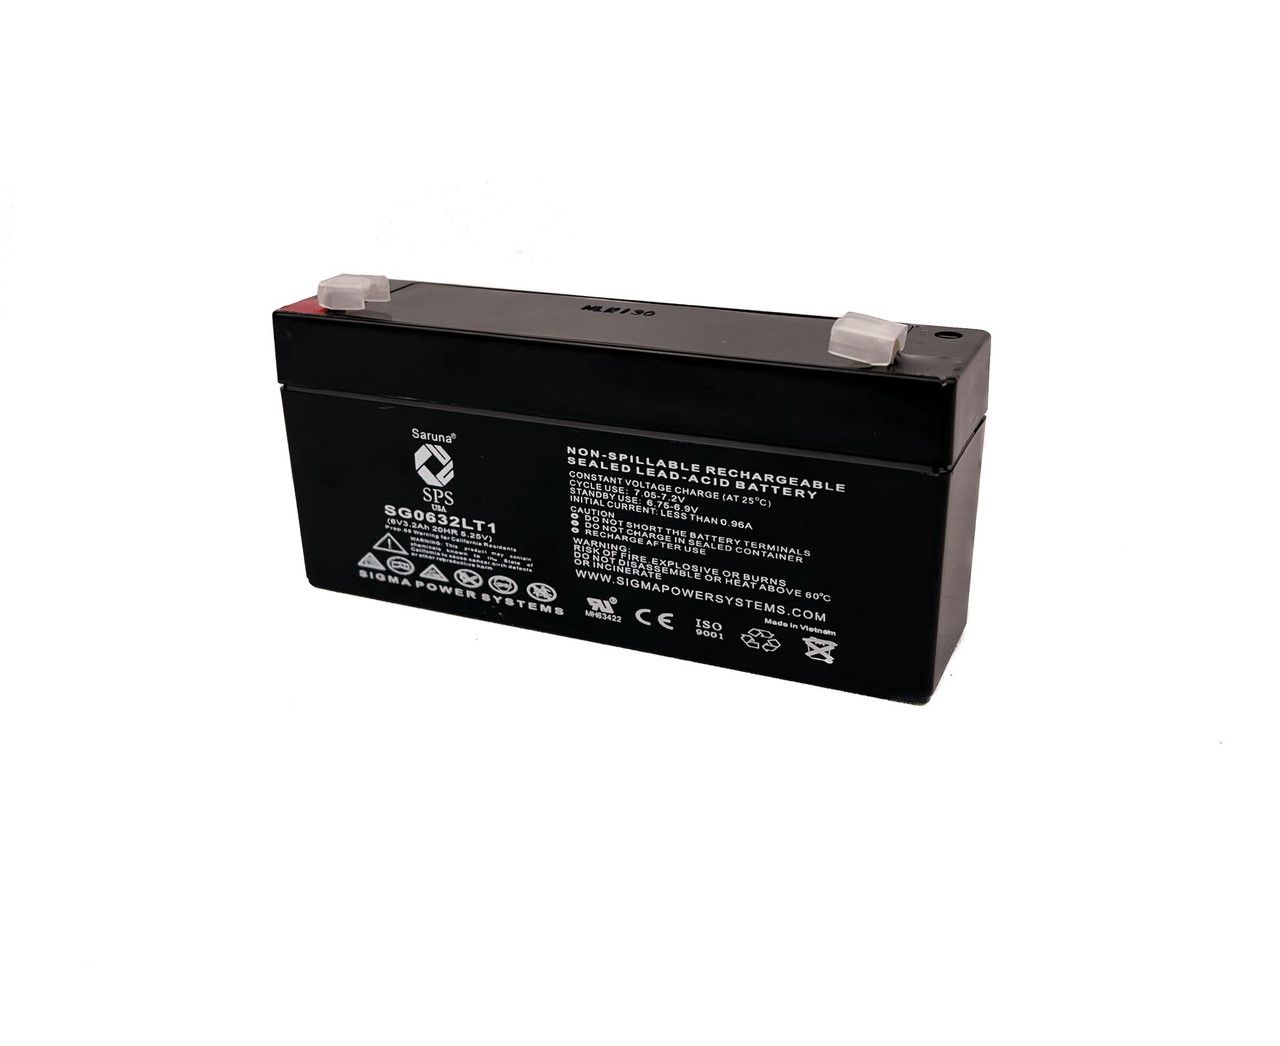 Raion Power 6V 3.2Ah Non-Spillable Replacement Rechargebale Battery for Amsco Arthoscope